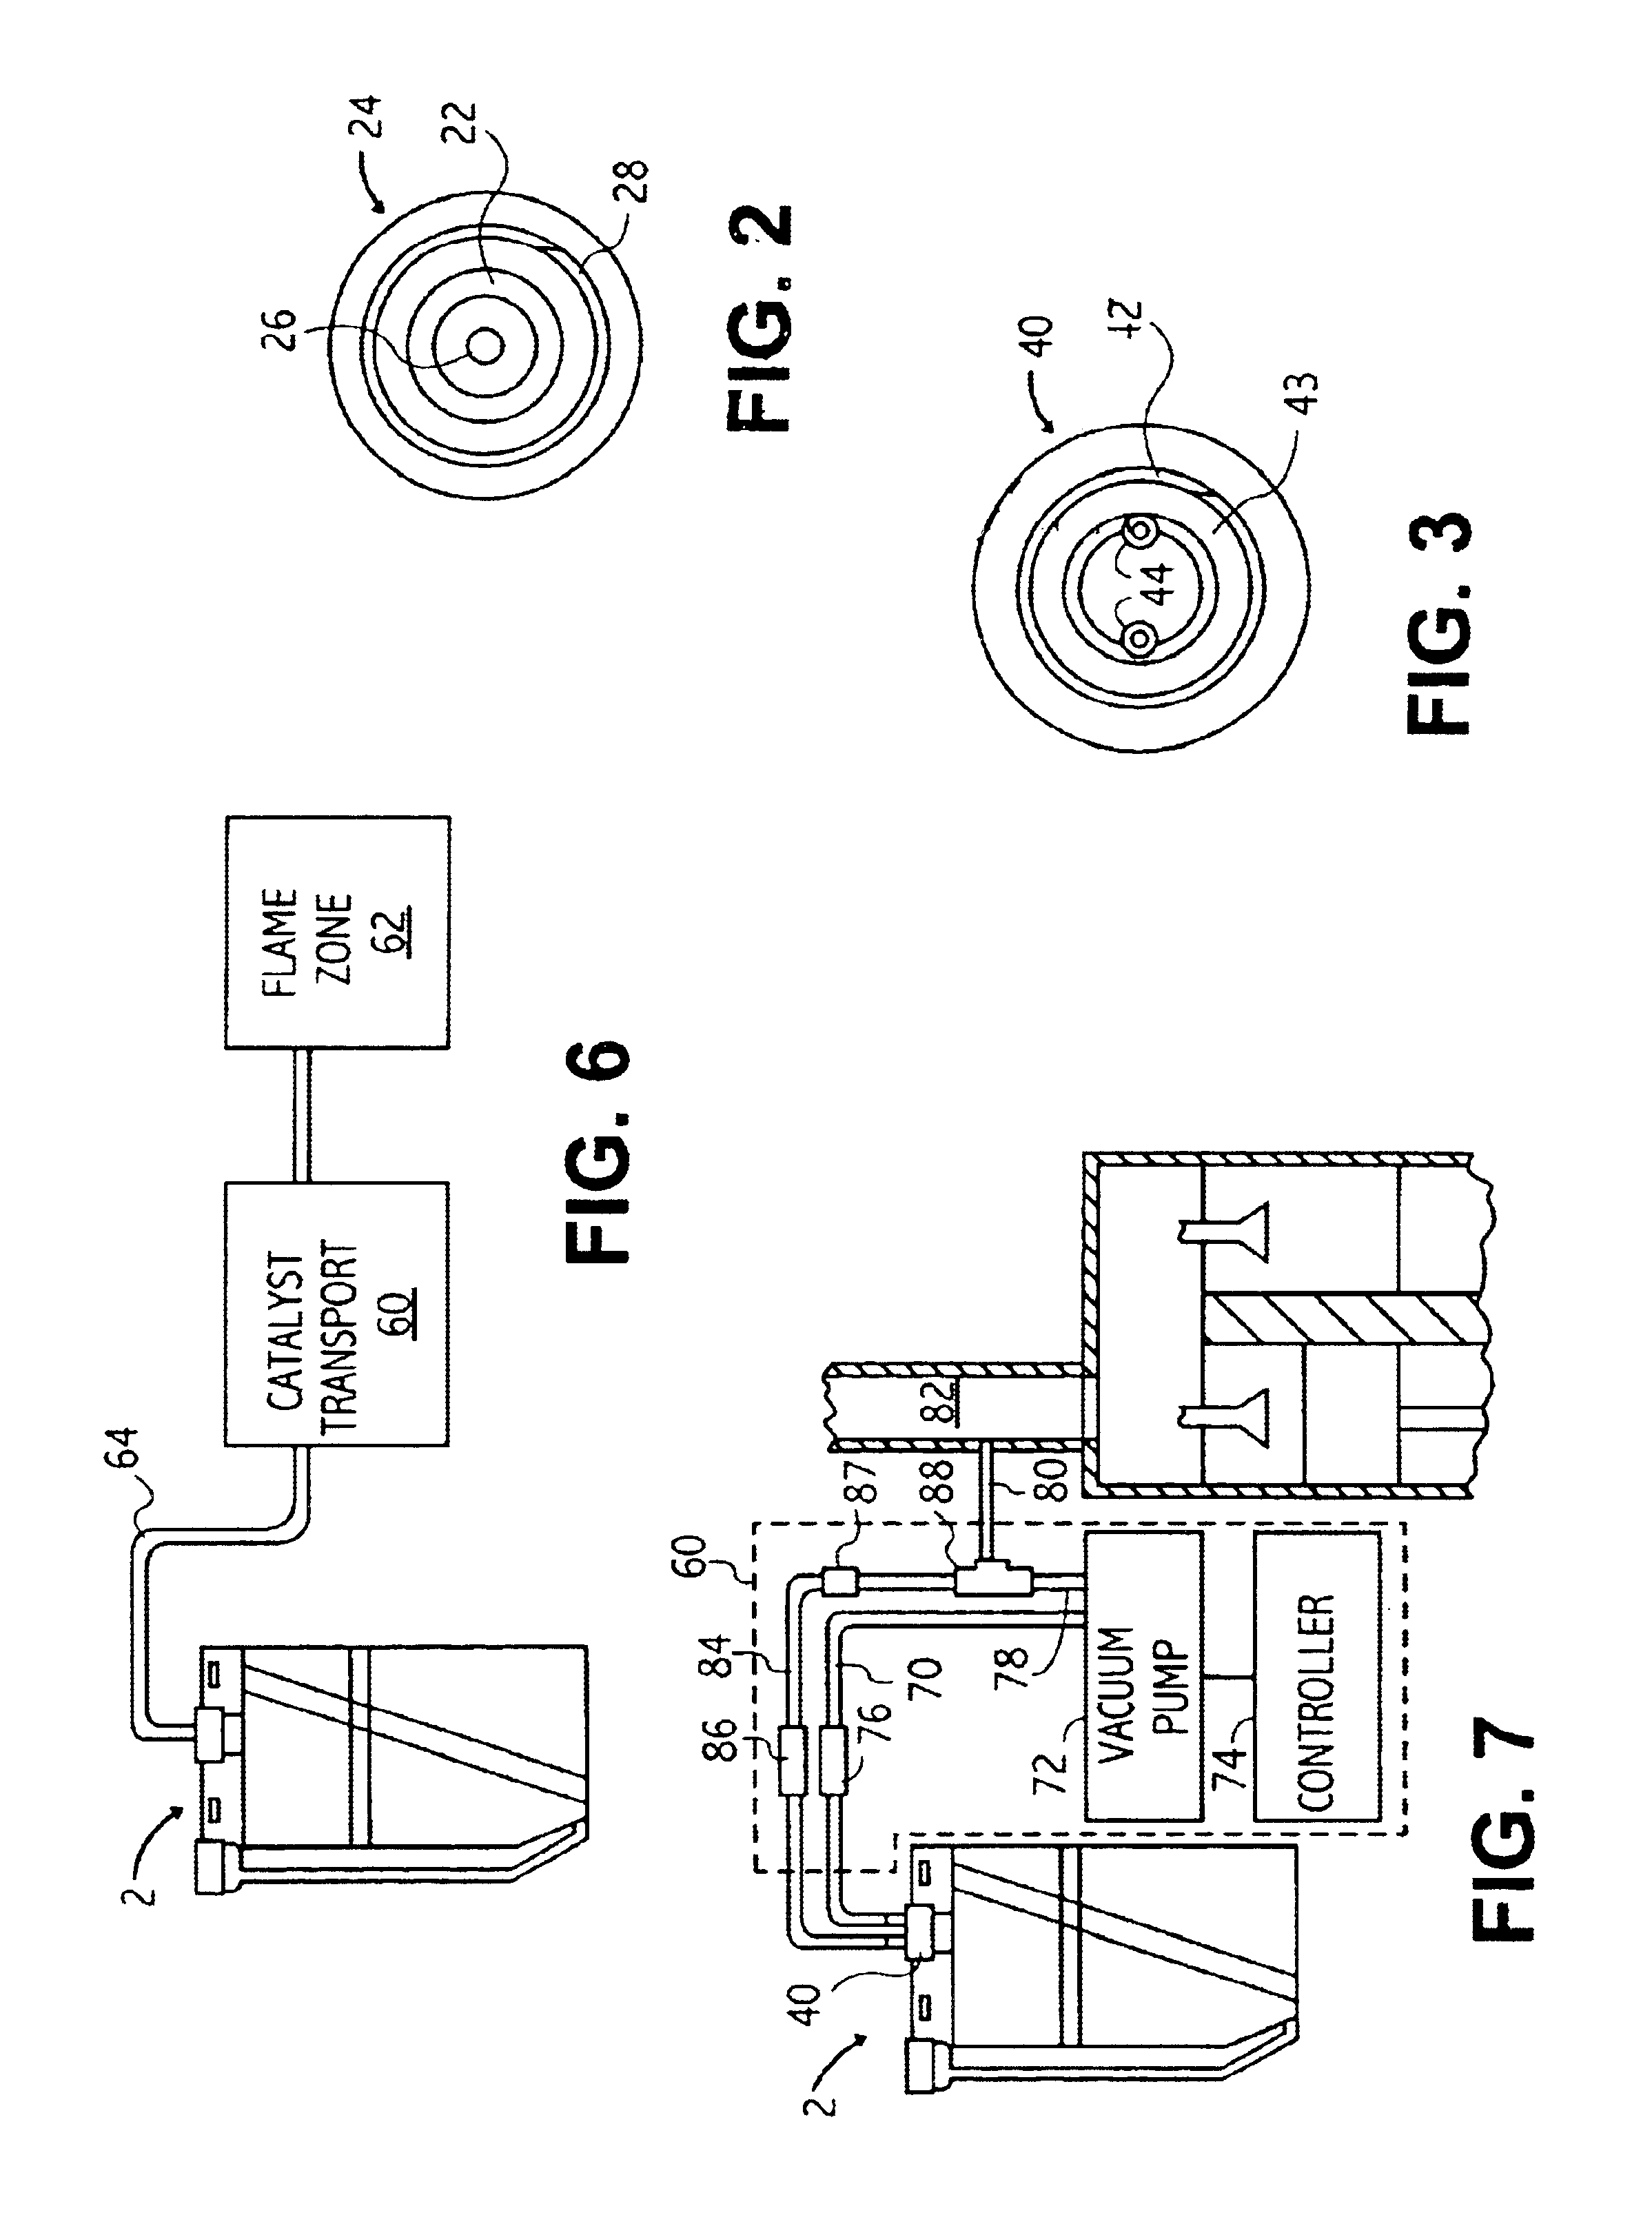 Delivery system for liquid catalysts